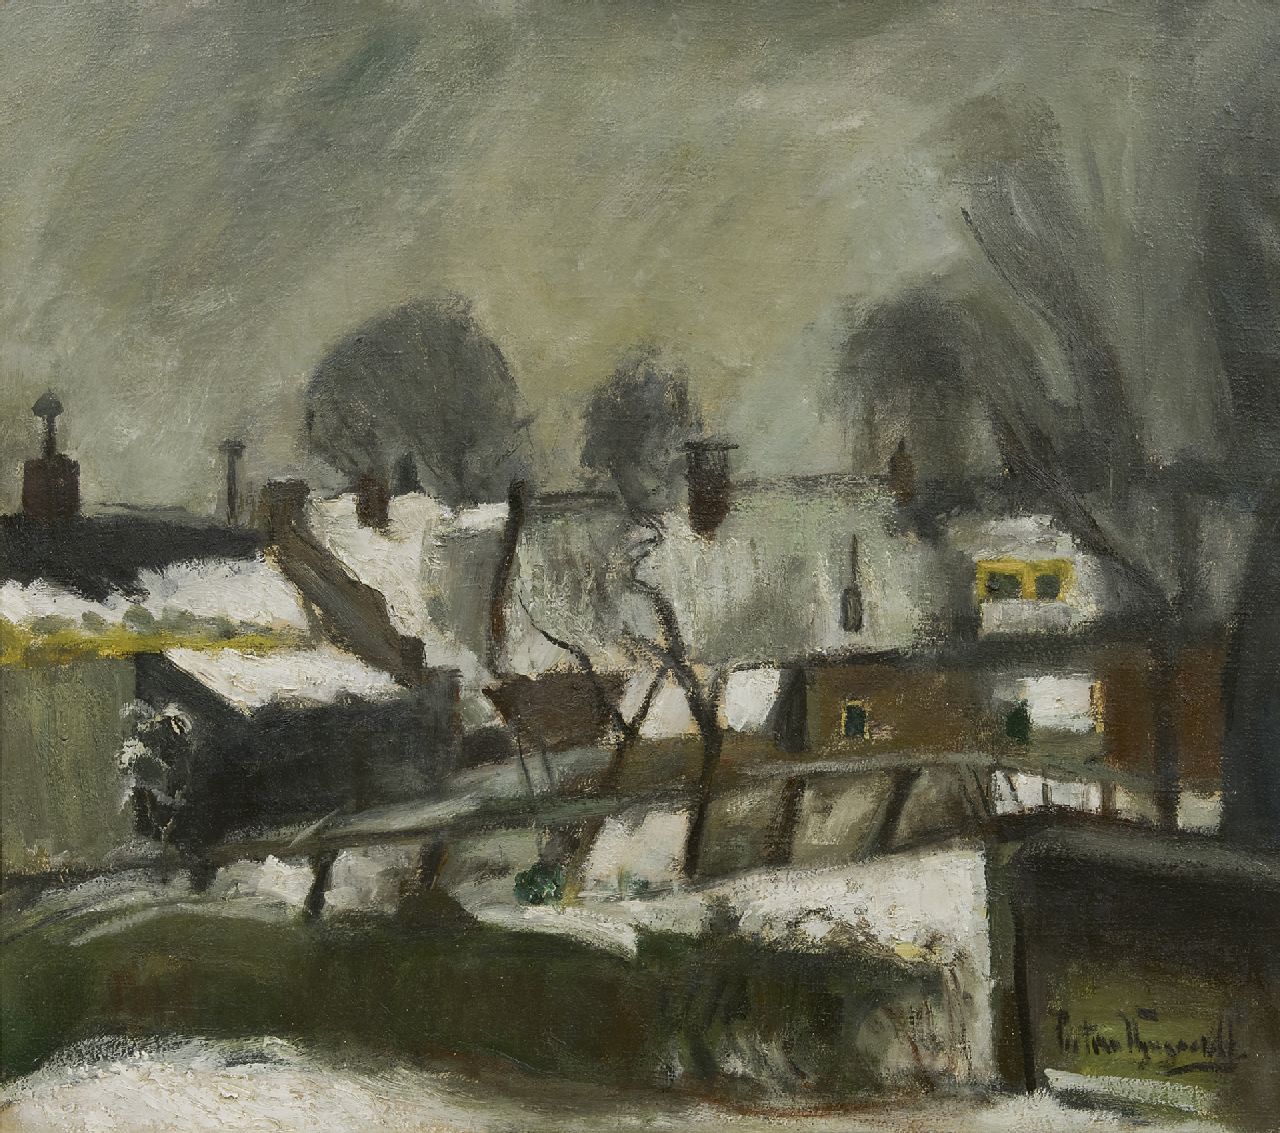 Wijngaerdt P.T. van | Petrus Theodorus 'Piet' van Wijngaerdt | Paintings offered for sale | The village Abcoude in winter, oil on canvas 70.7 x 80.4 cm, signed l.r. and dated 1946 on the reverse